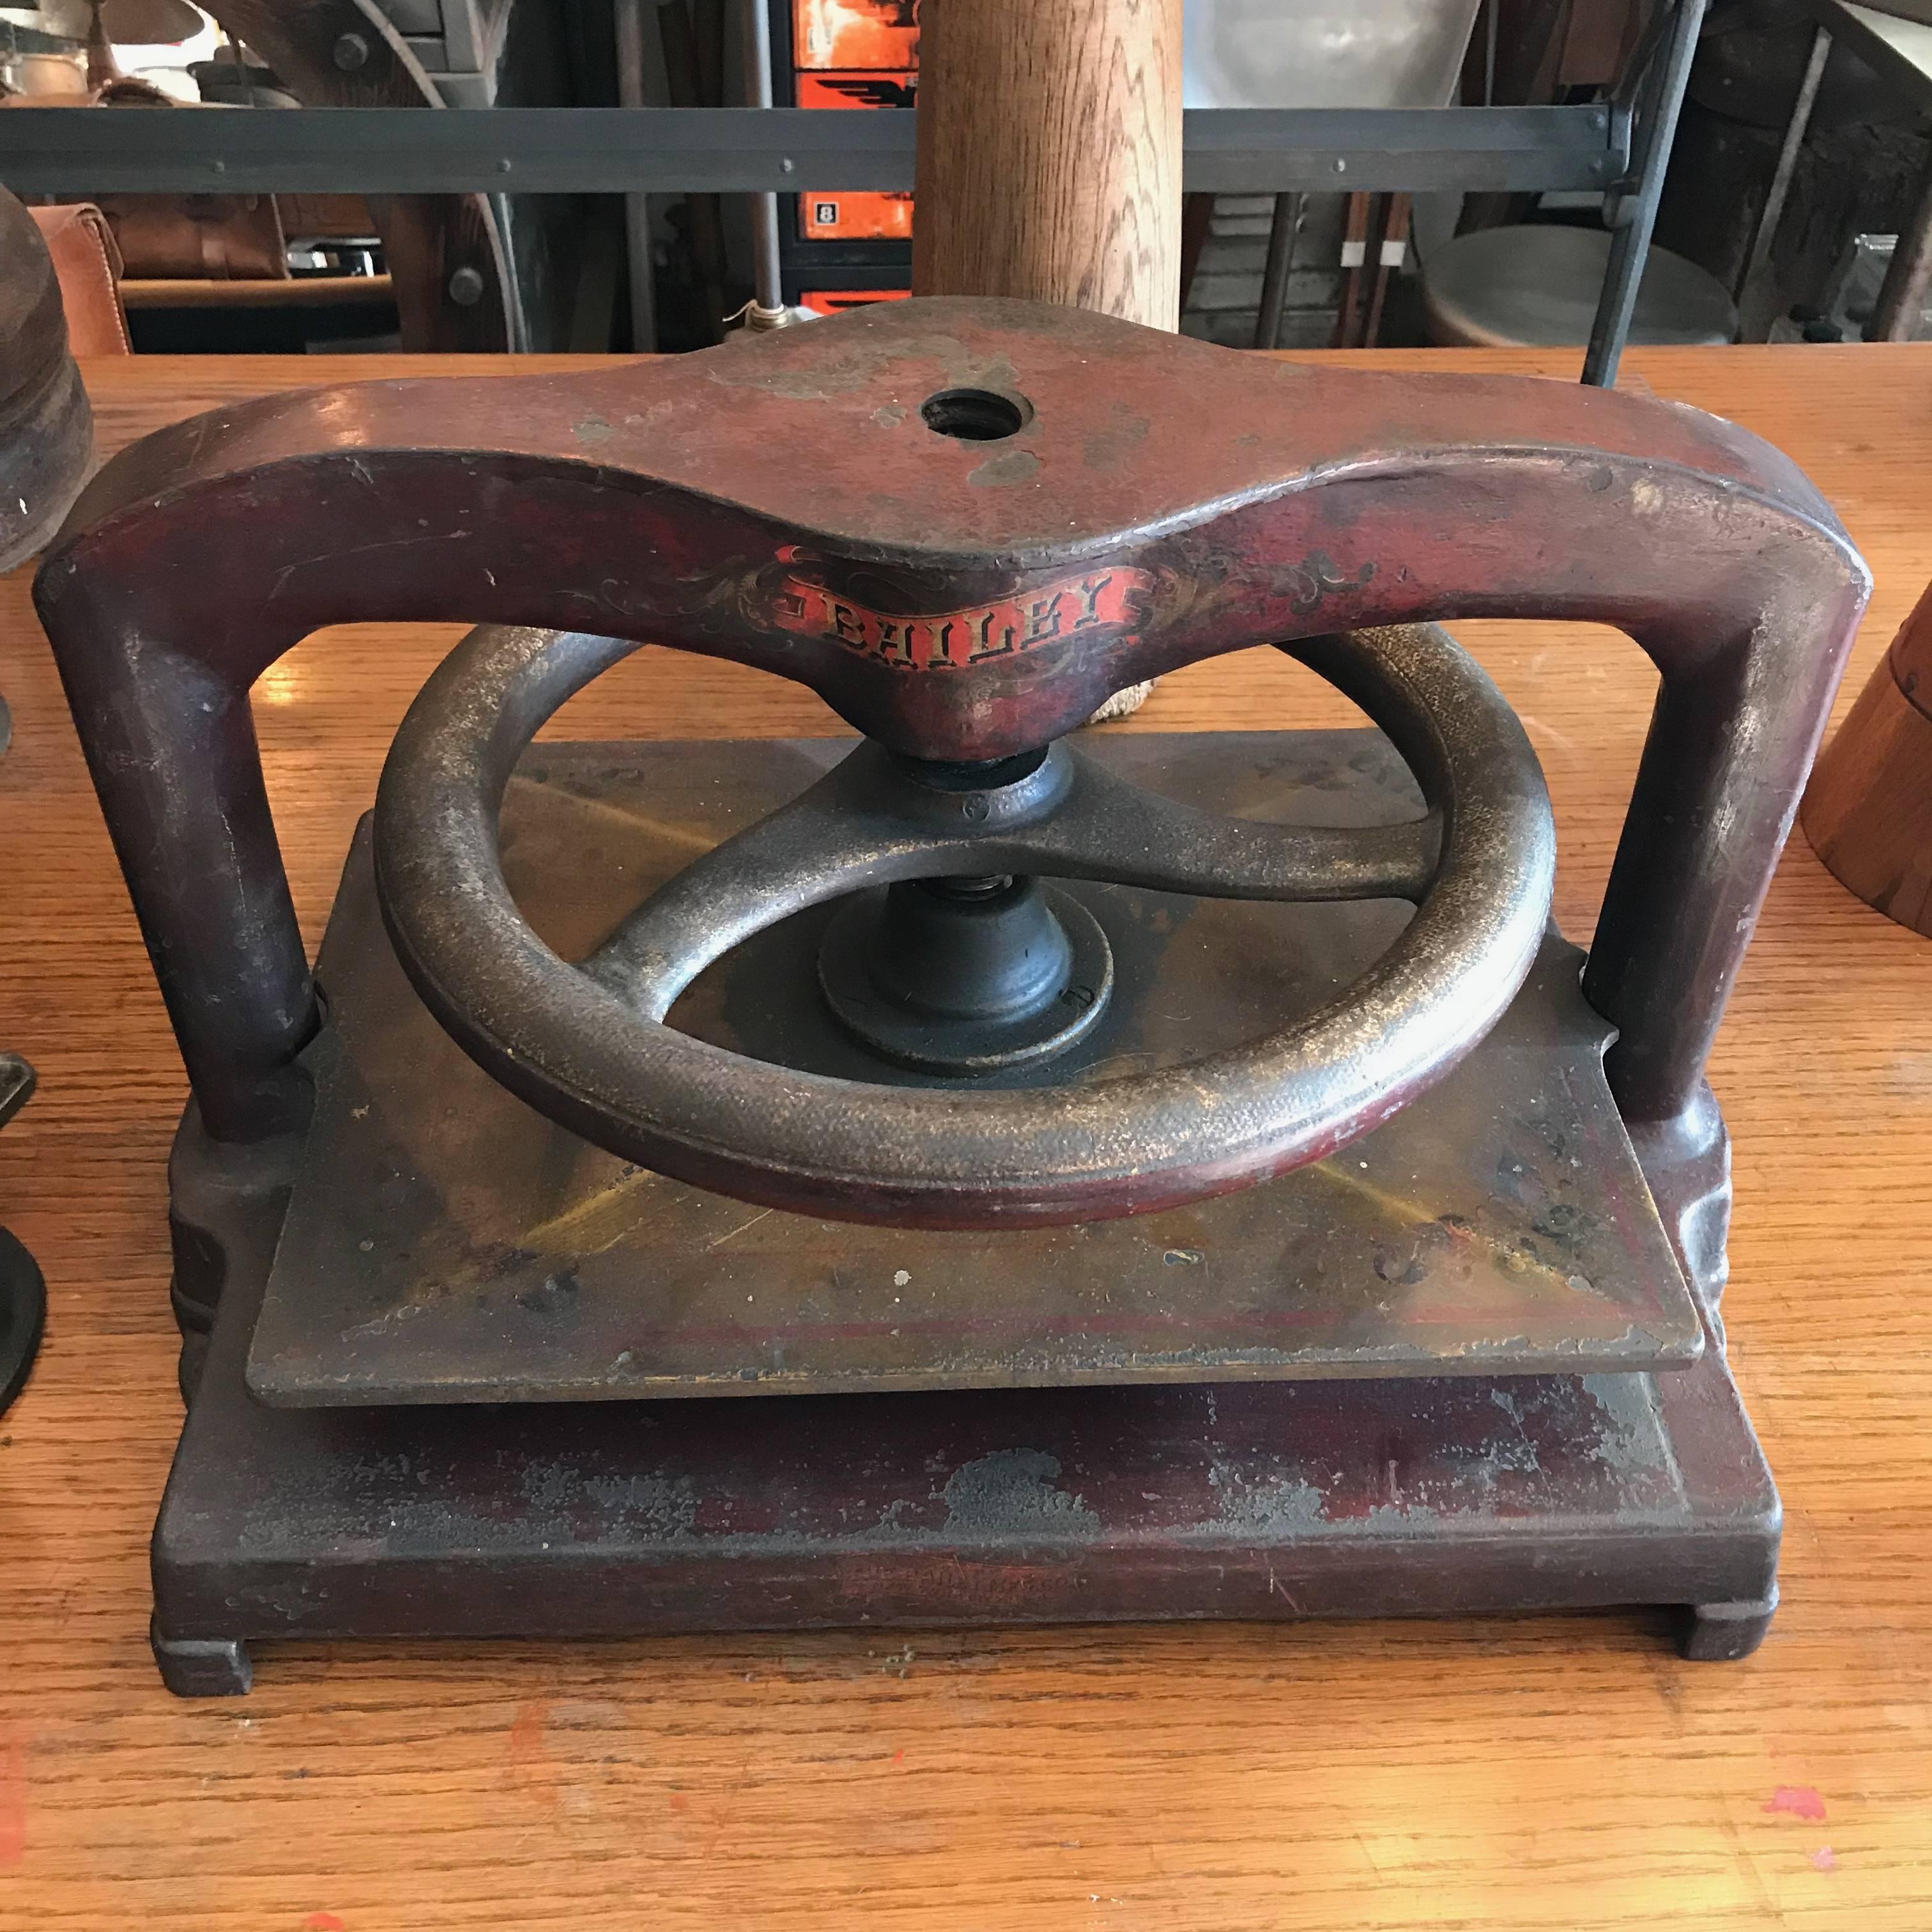 American Large Hand-Painted Cast Iron Letter Copying Machine Book Press by Bailey